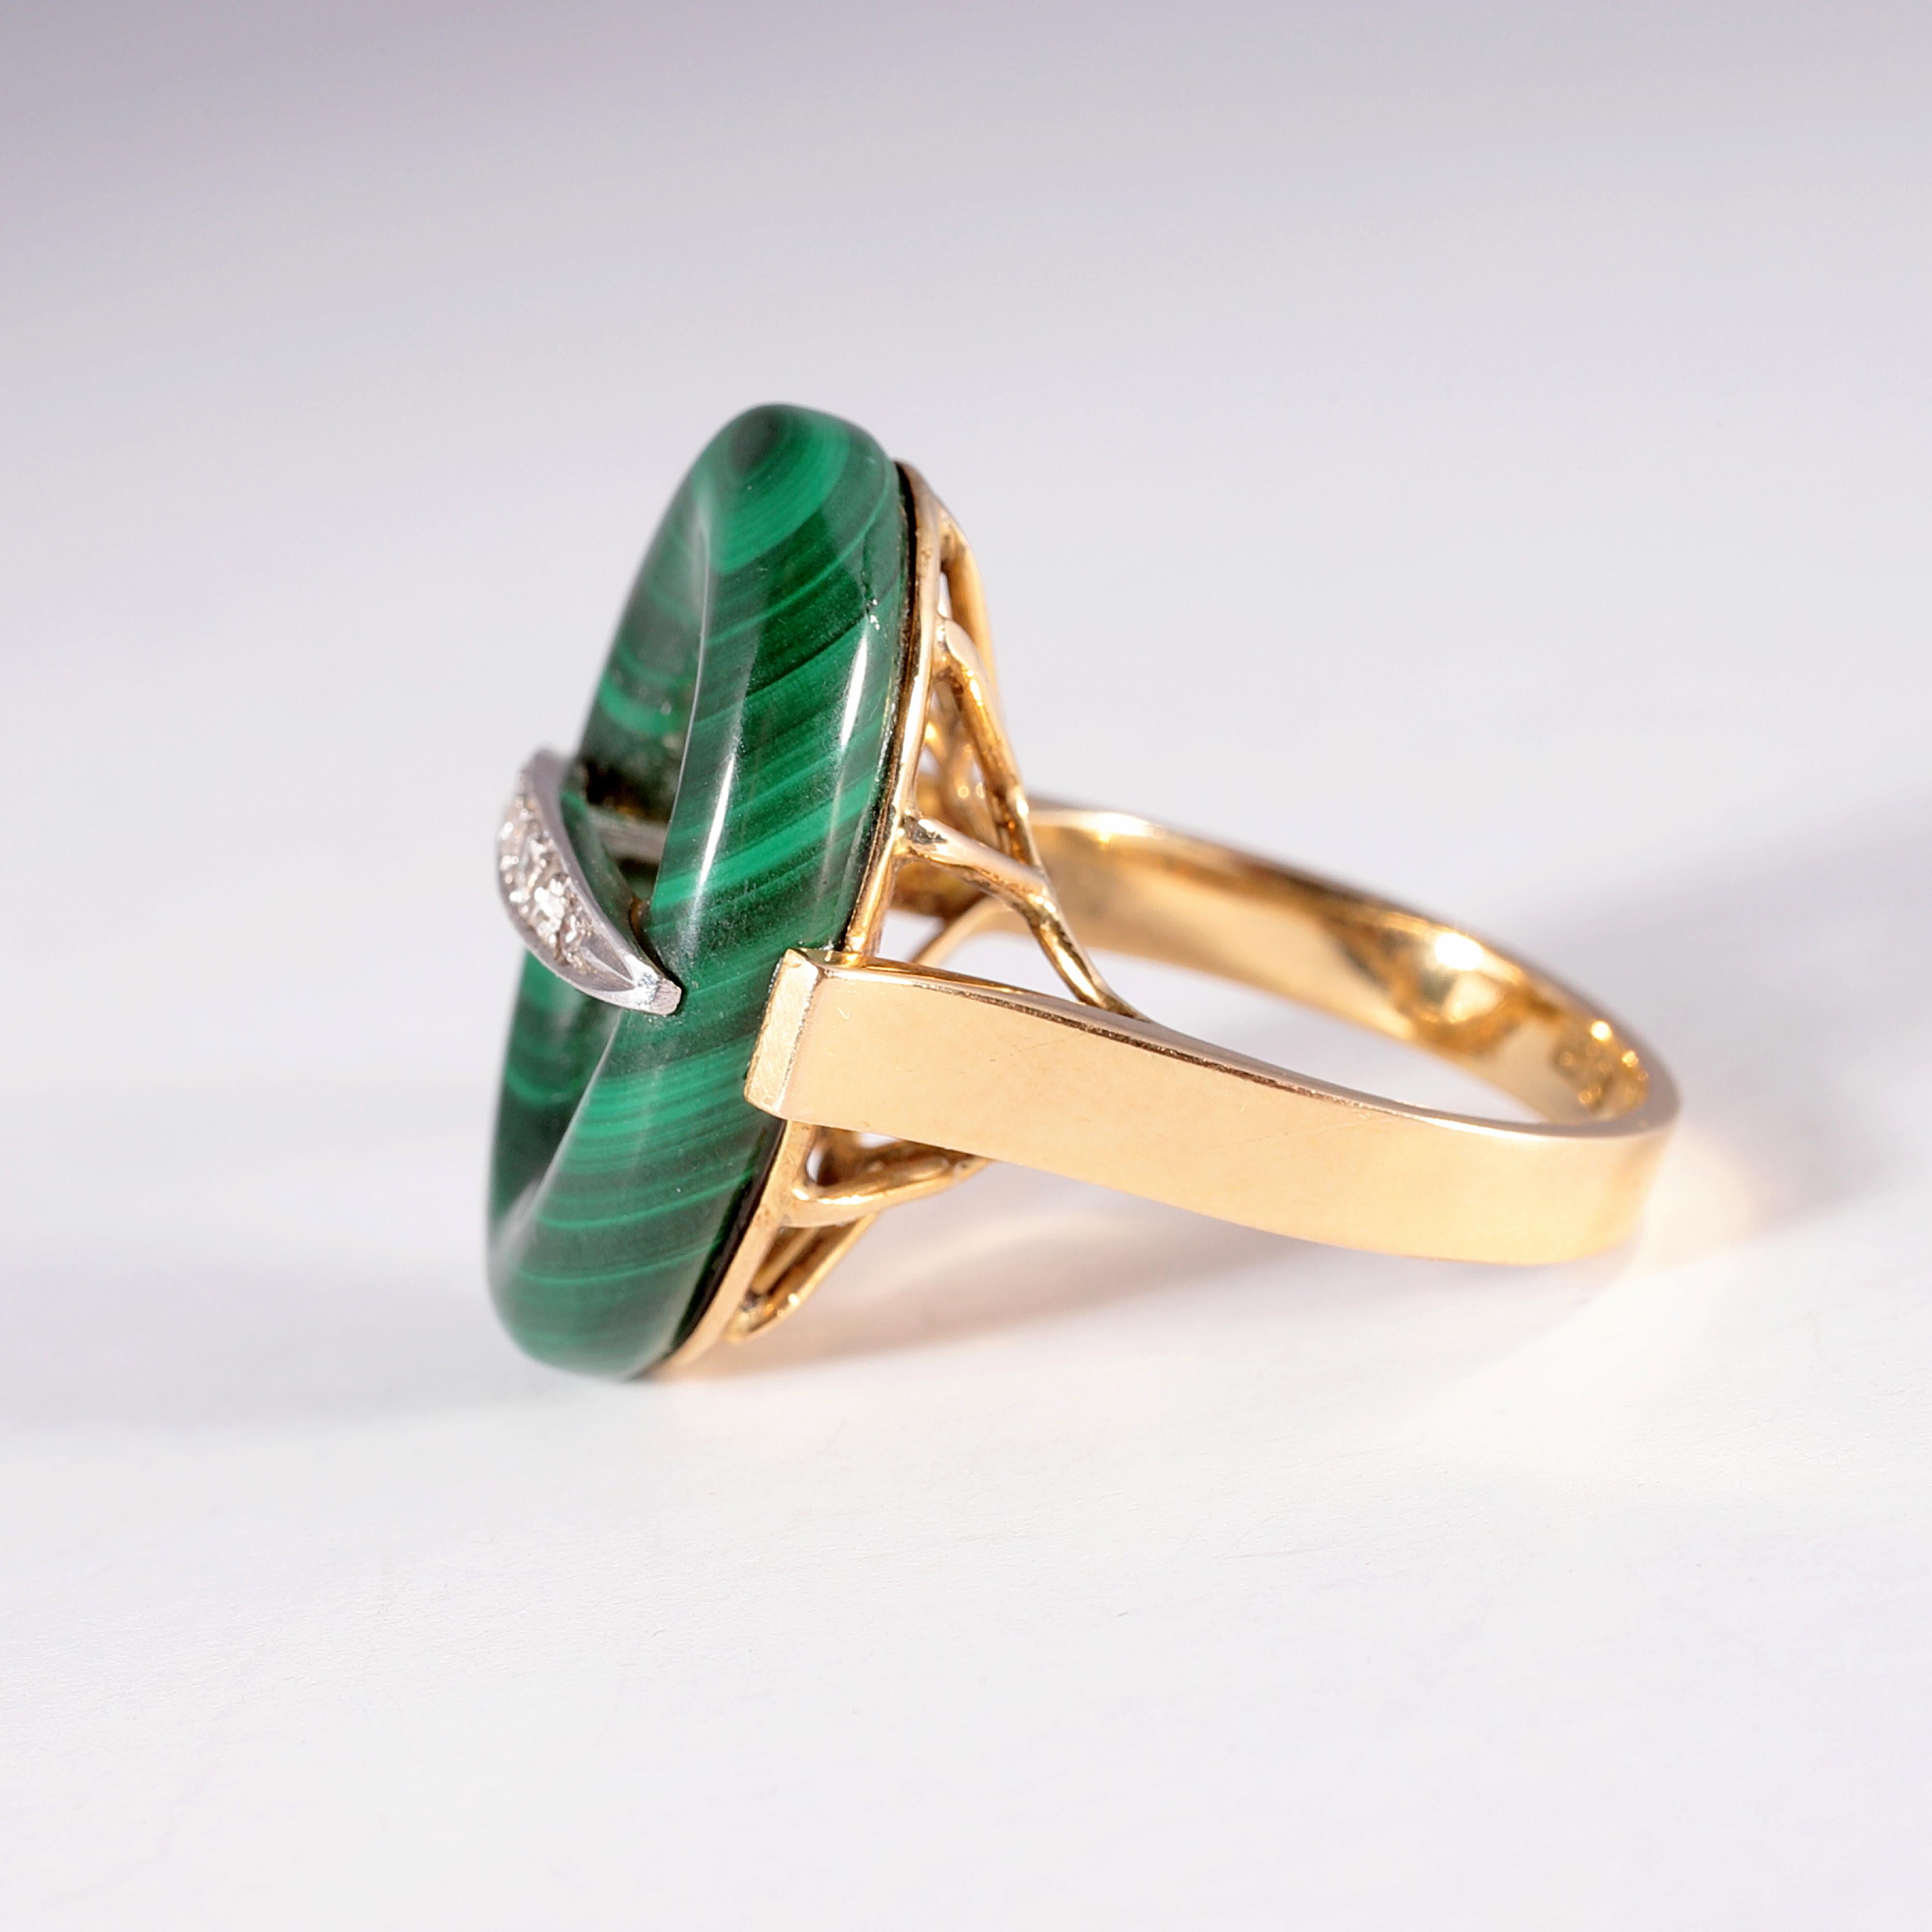 This beautiful yellow and white gold ring, with pierced undergallery, supports a stunning oval-shaped malachite - with an accent diamond bar across the center.  Size 6